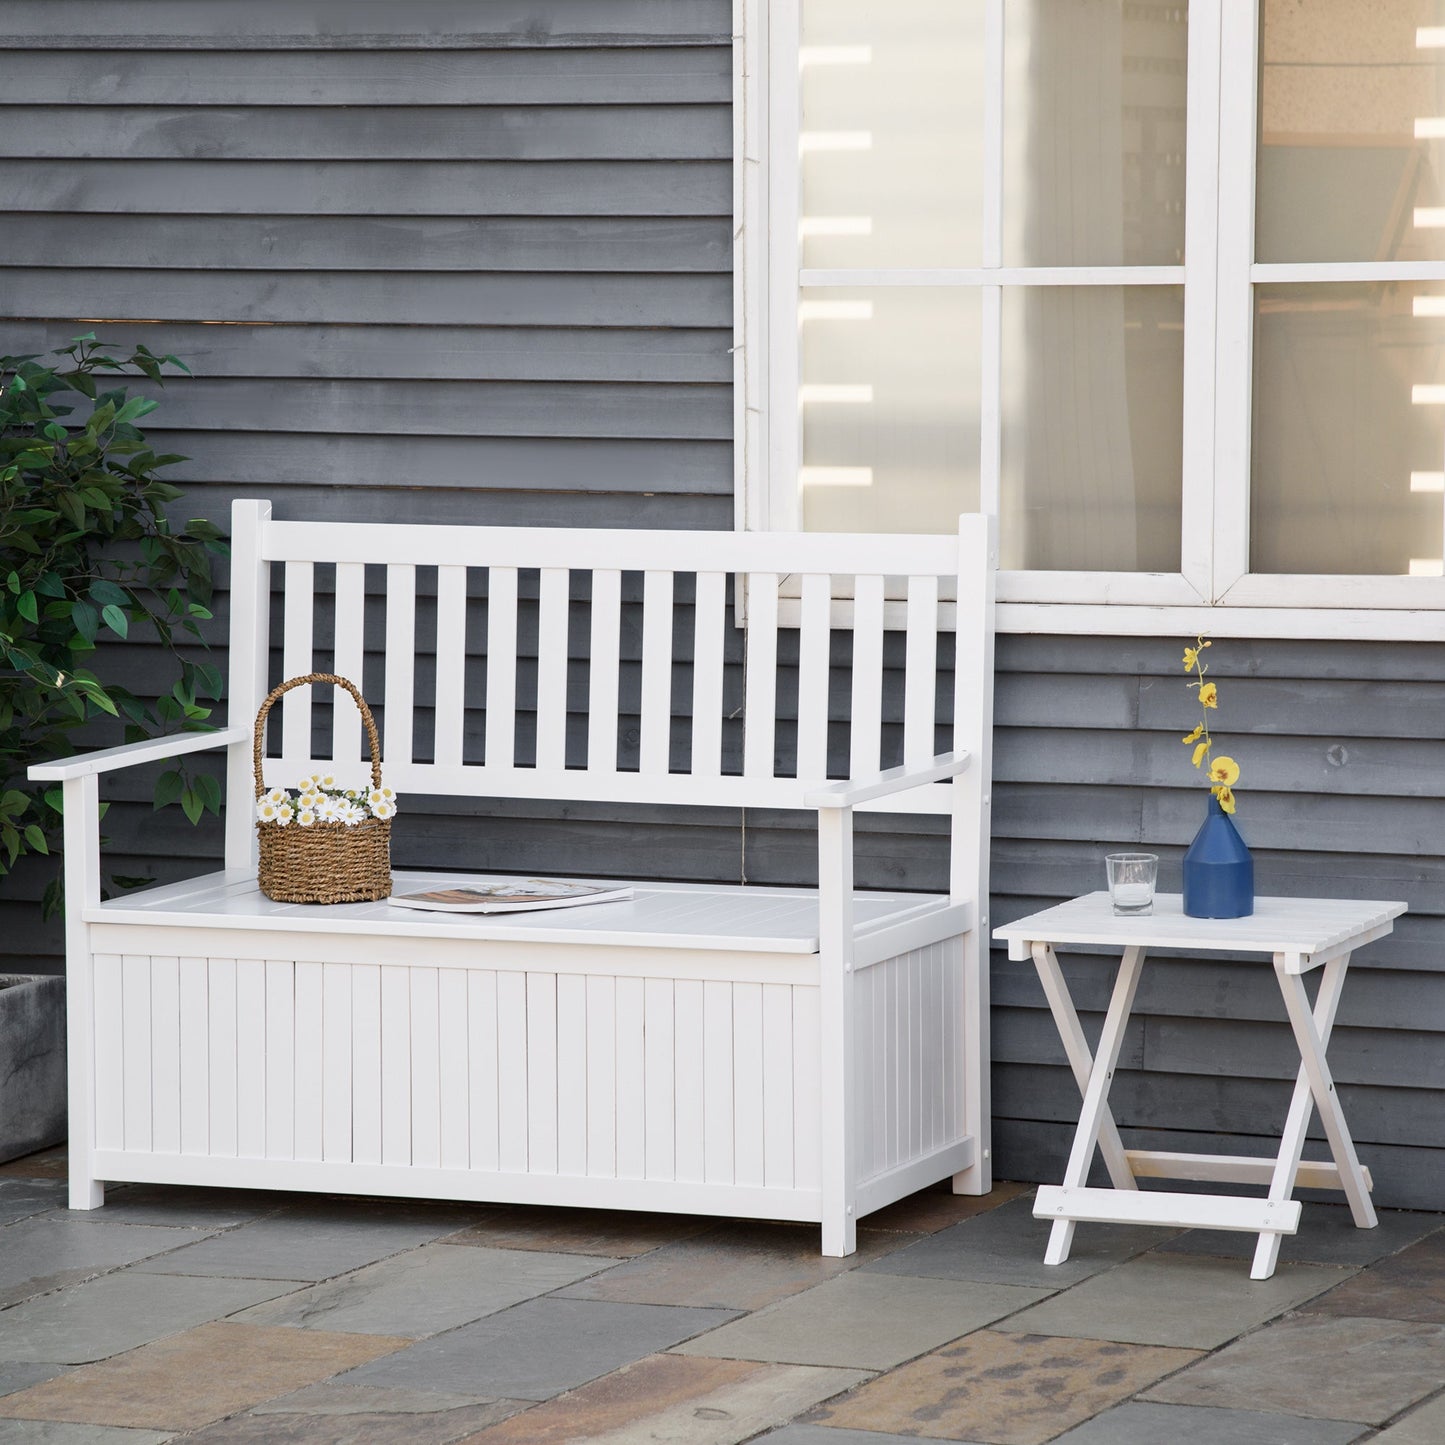 2-Seater Storage Garden Bench, Outdoor Patio Seating Furniture, Deck Box with Inner for Patio, Porch or Balcony, White at Gallery Canada